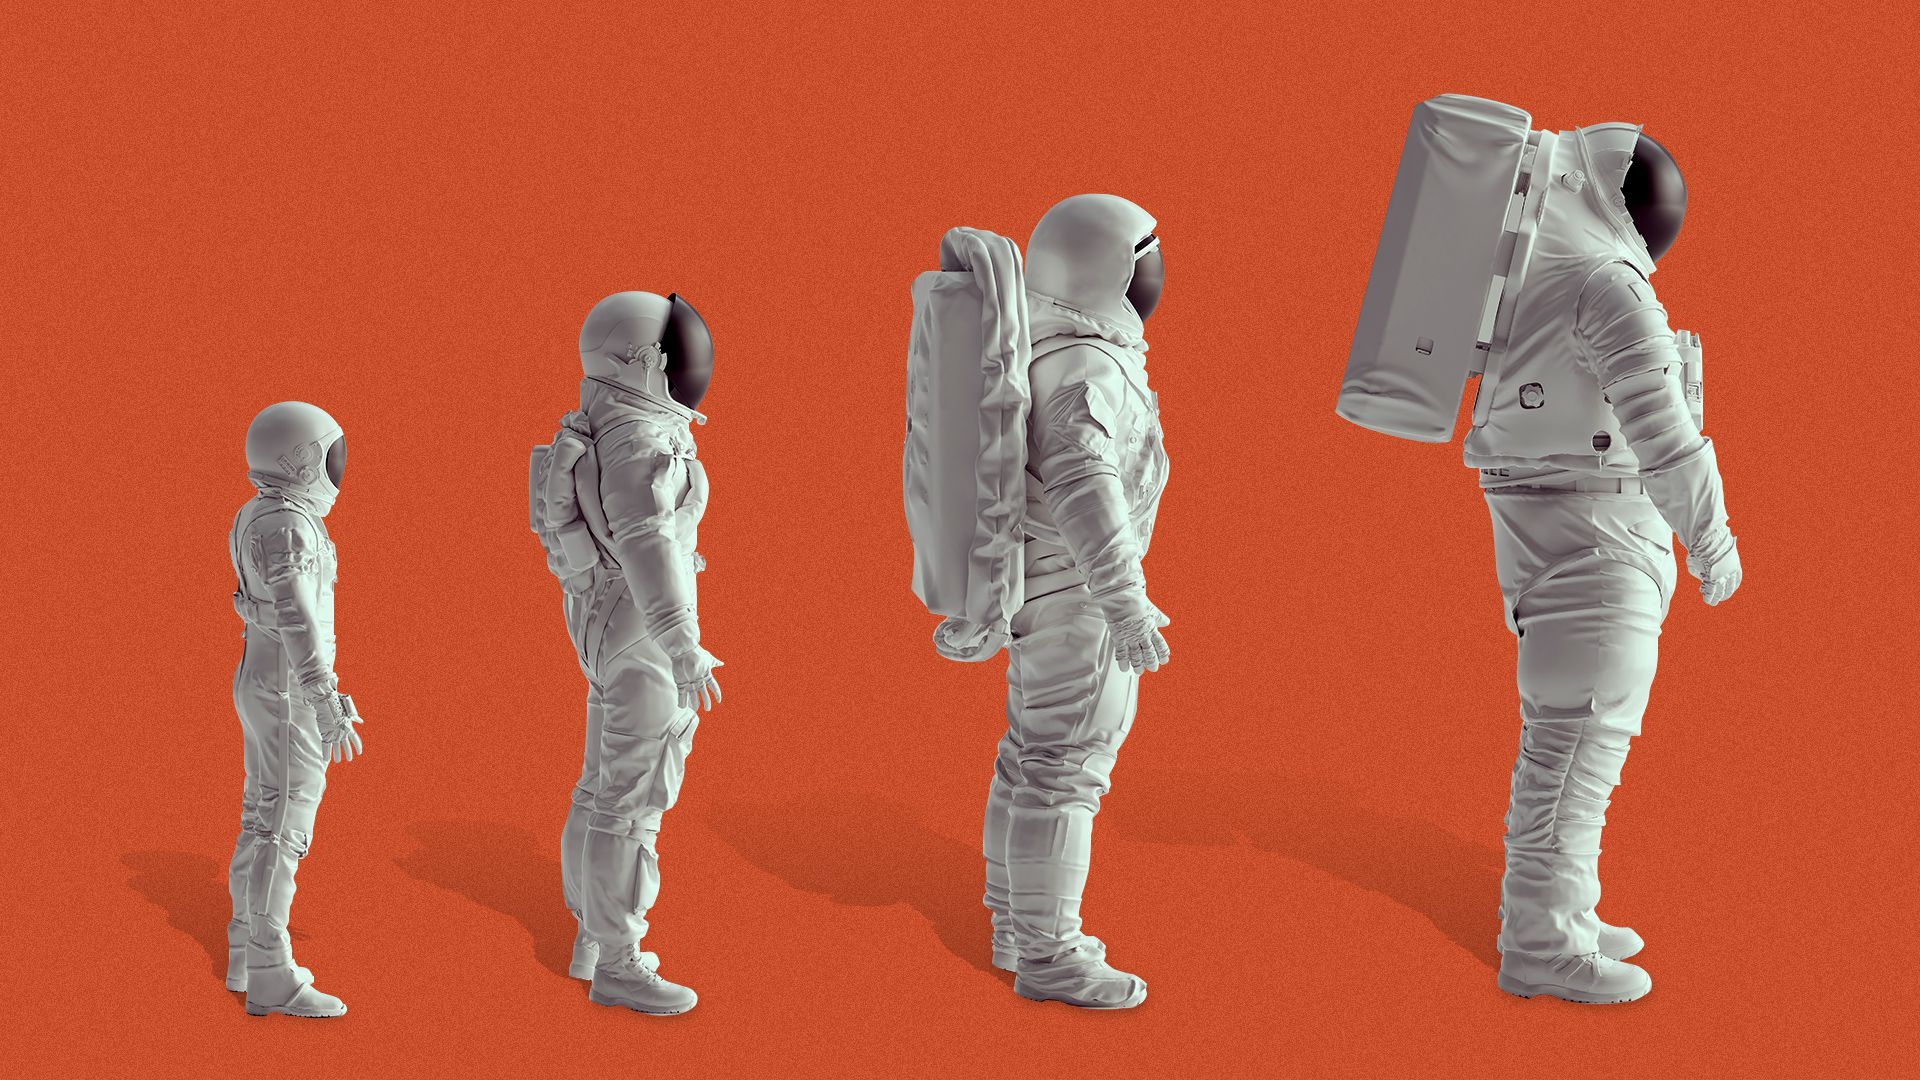 Illustration of a series of astronauts getting larger and wearing progressively better space suits, similar to the March of Progress illustration. 